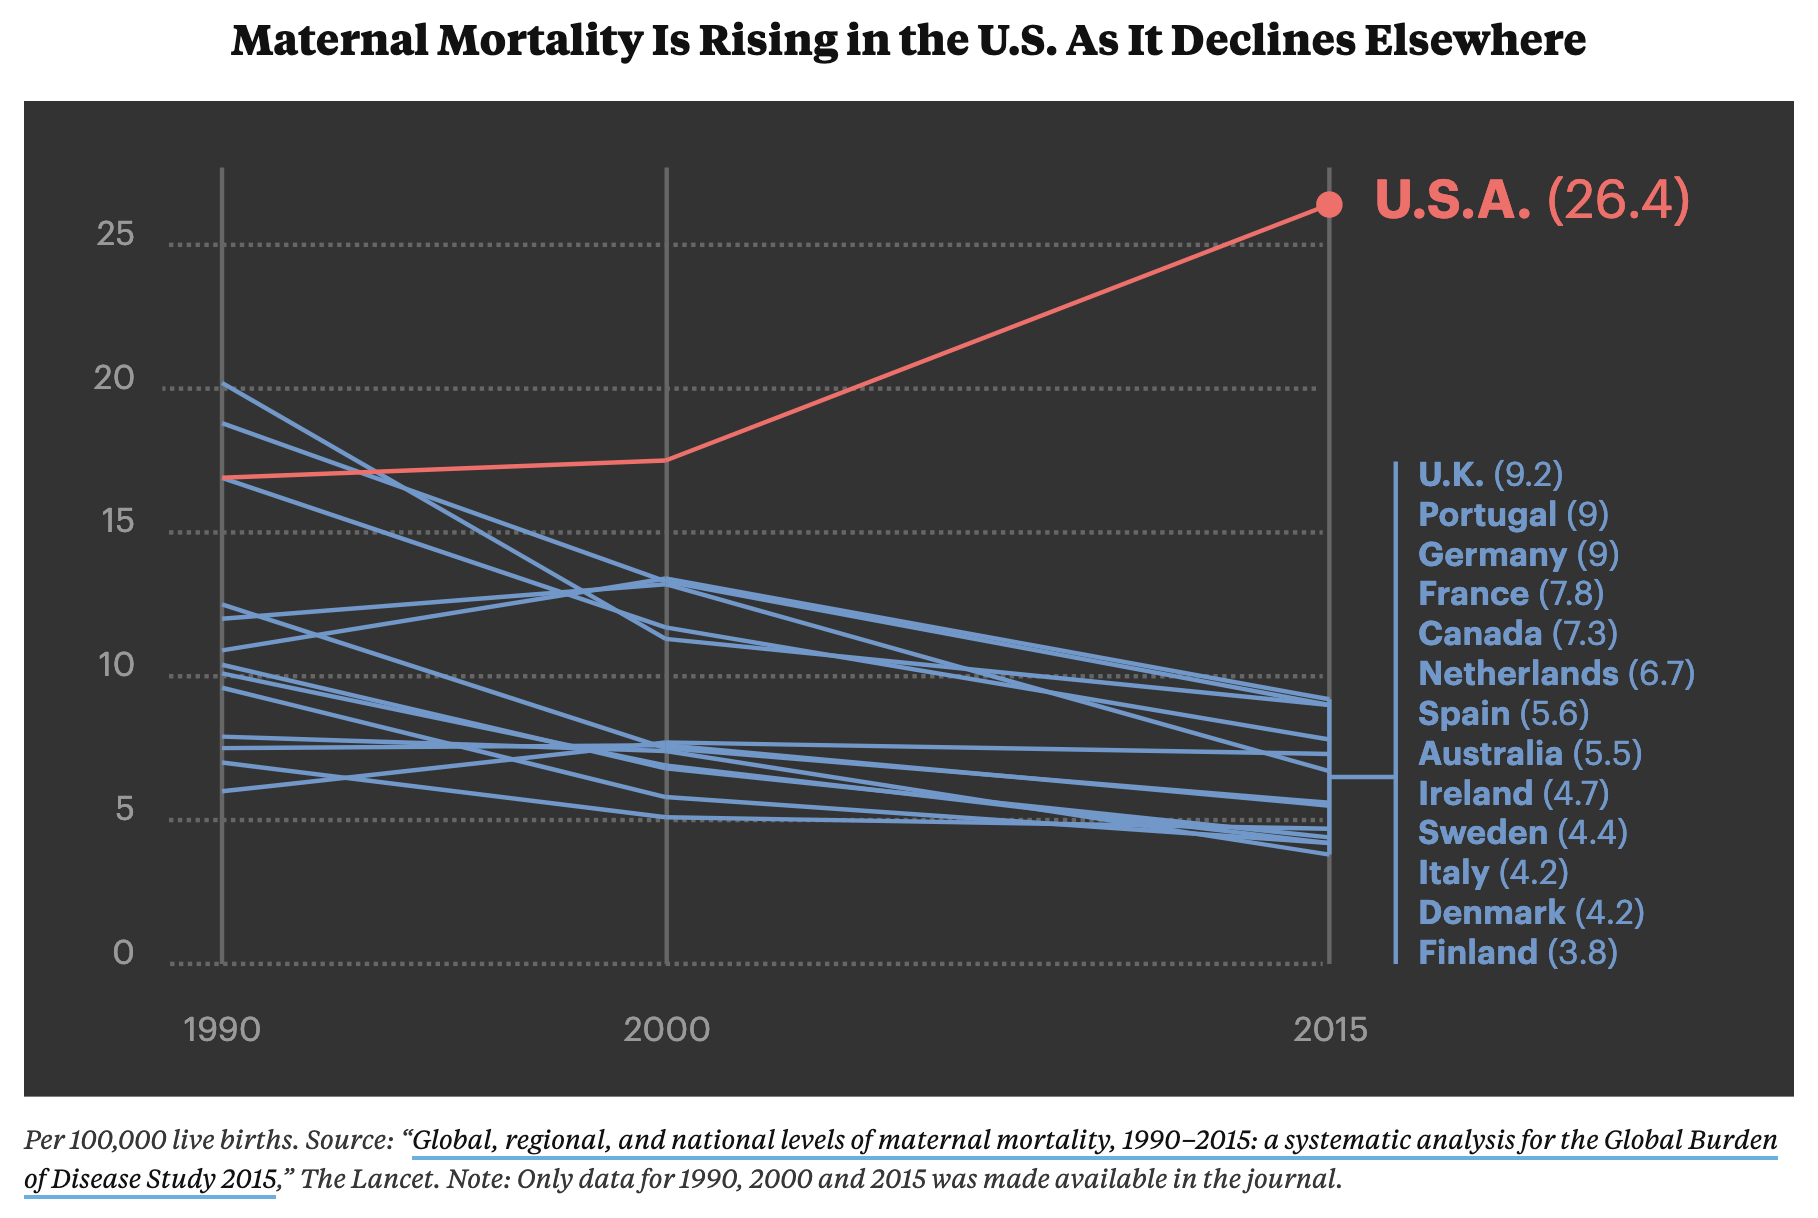 A line chart showing increasing maternal mortality in the US, while the lines for other countries are going down